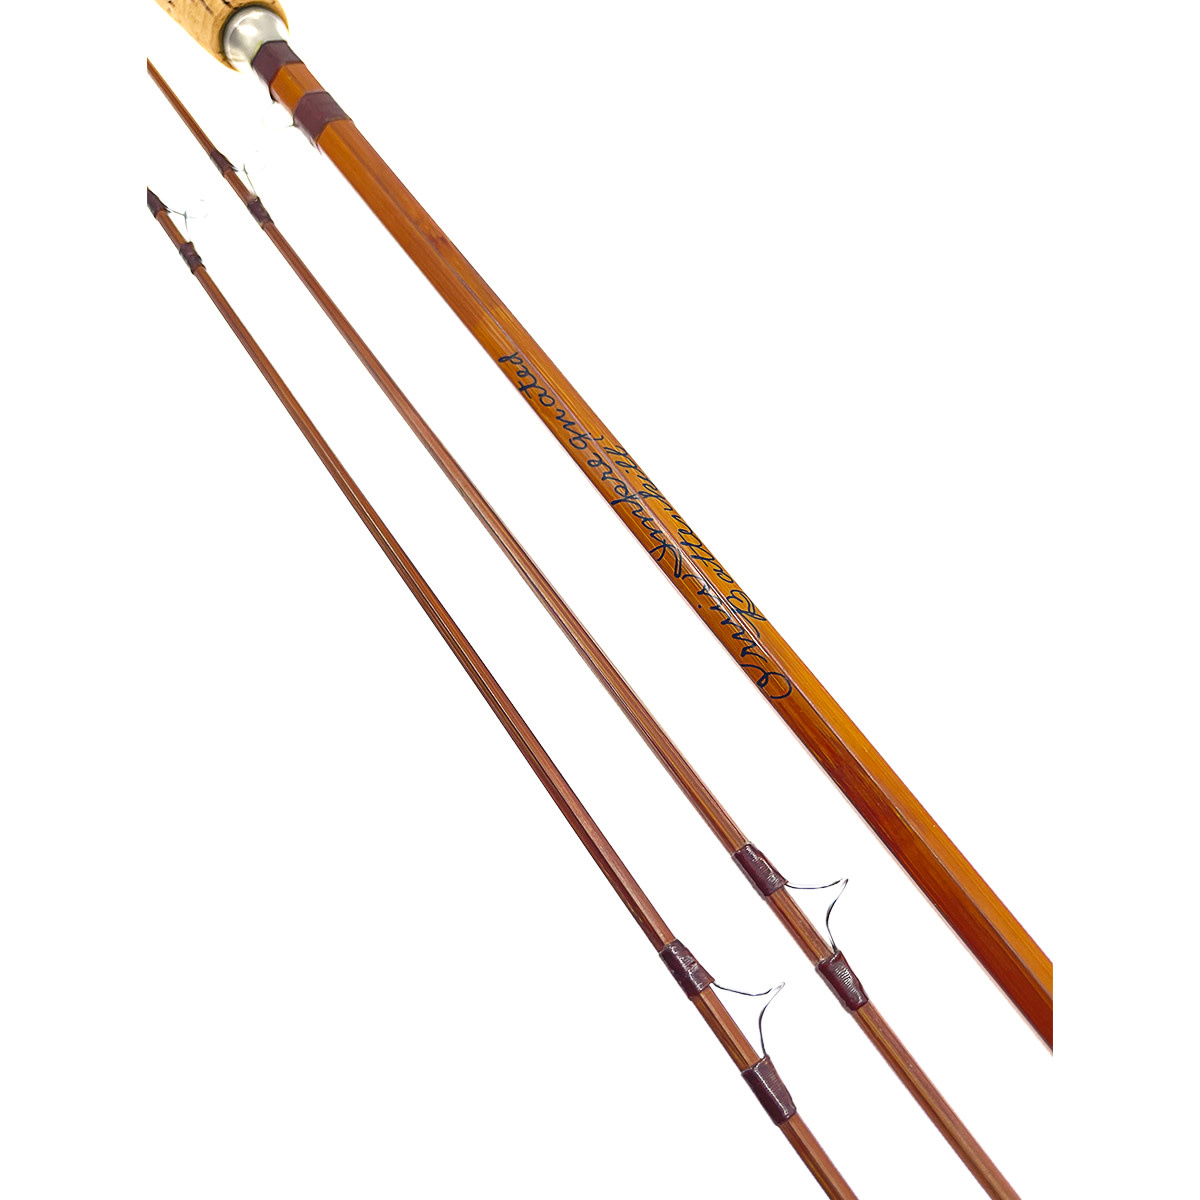 Orvis Battenkill Bamboo Fly Rod 7' - 6 weight, 2pc. - Impregnated